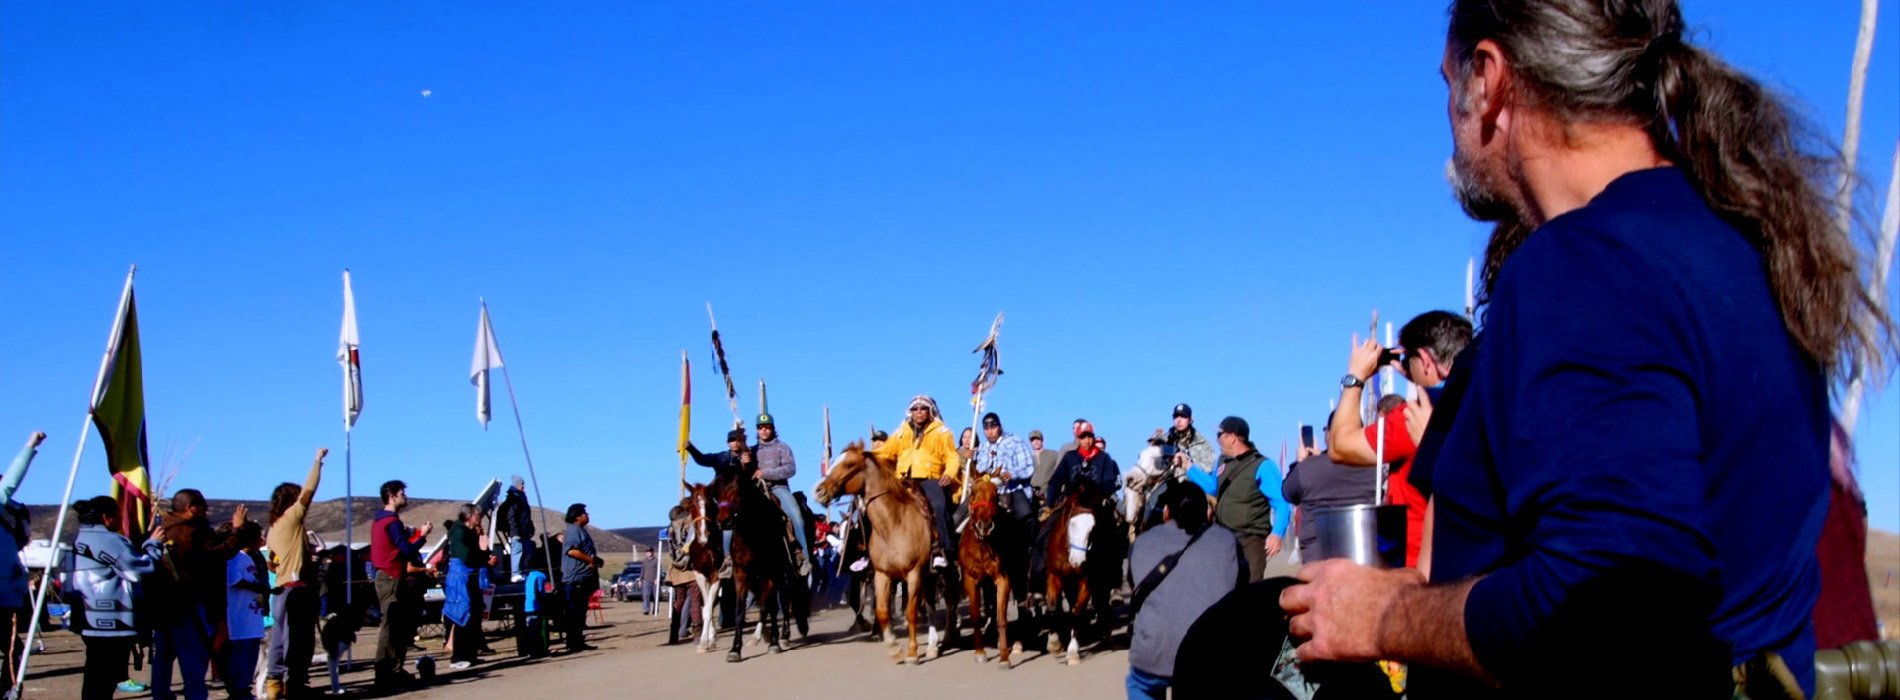 Indigenous activists on horseback in front of blue sky